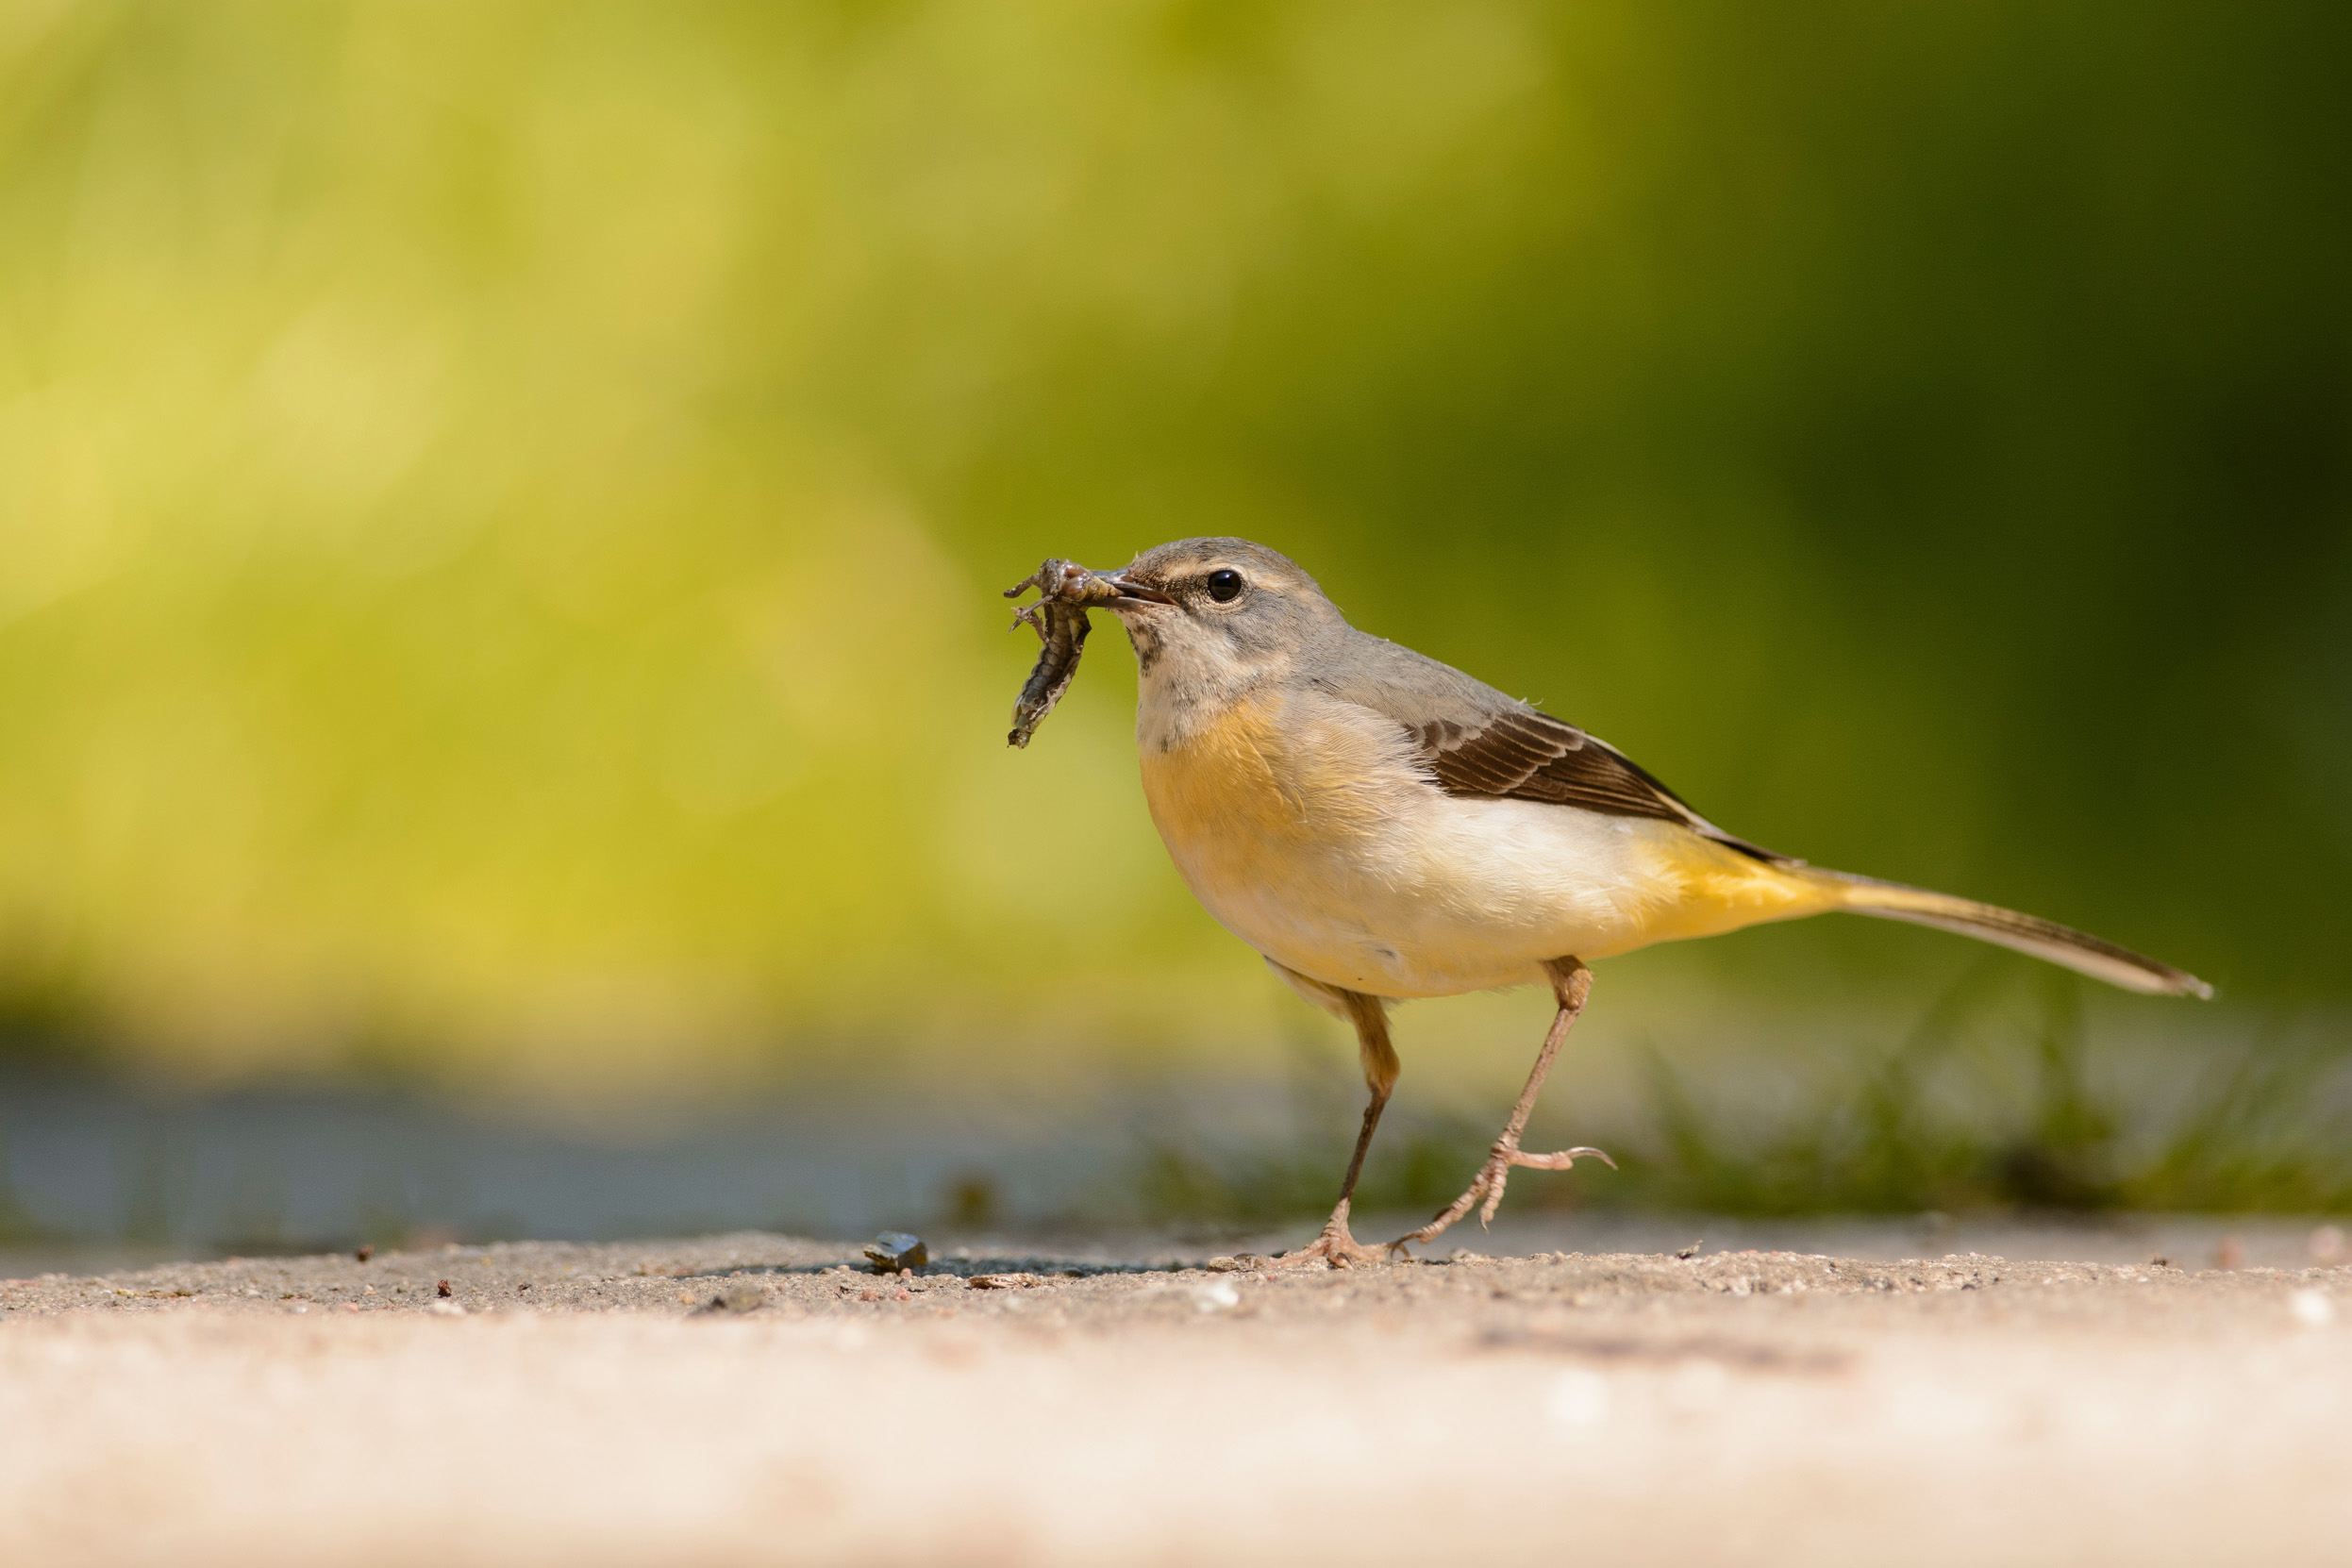 A female Grey Wagtail stood on a dusty dirt floor with insect in their beak.